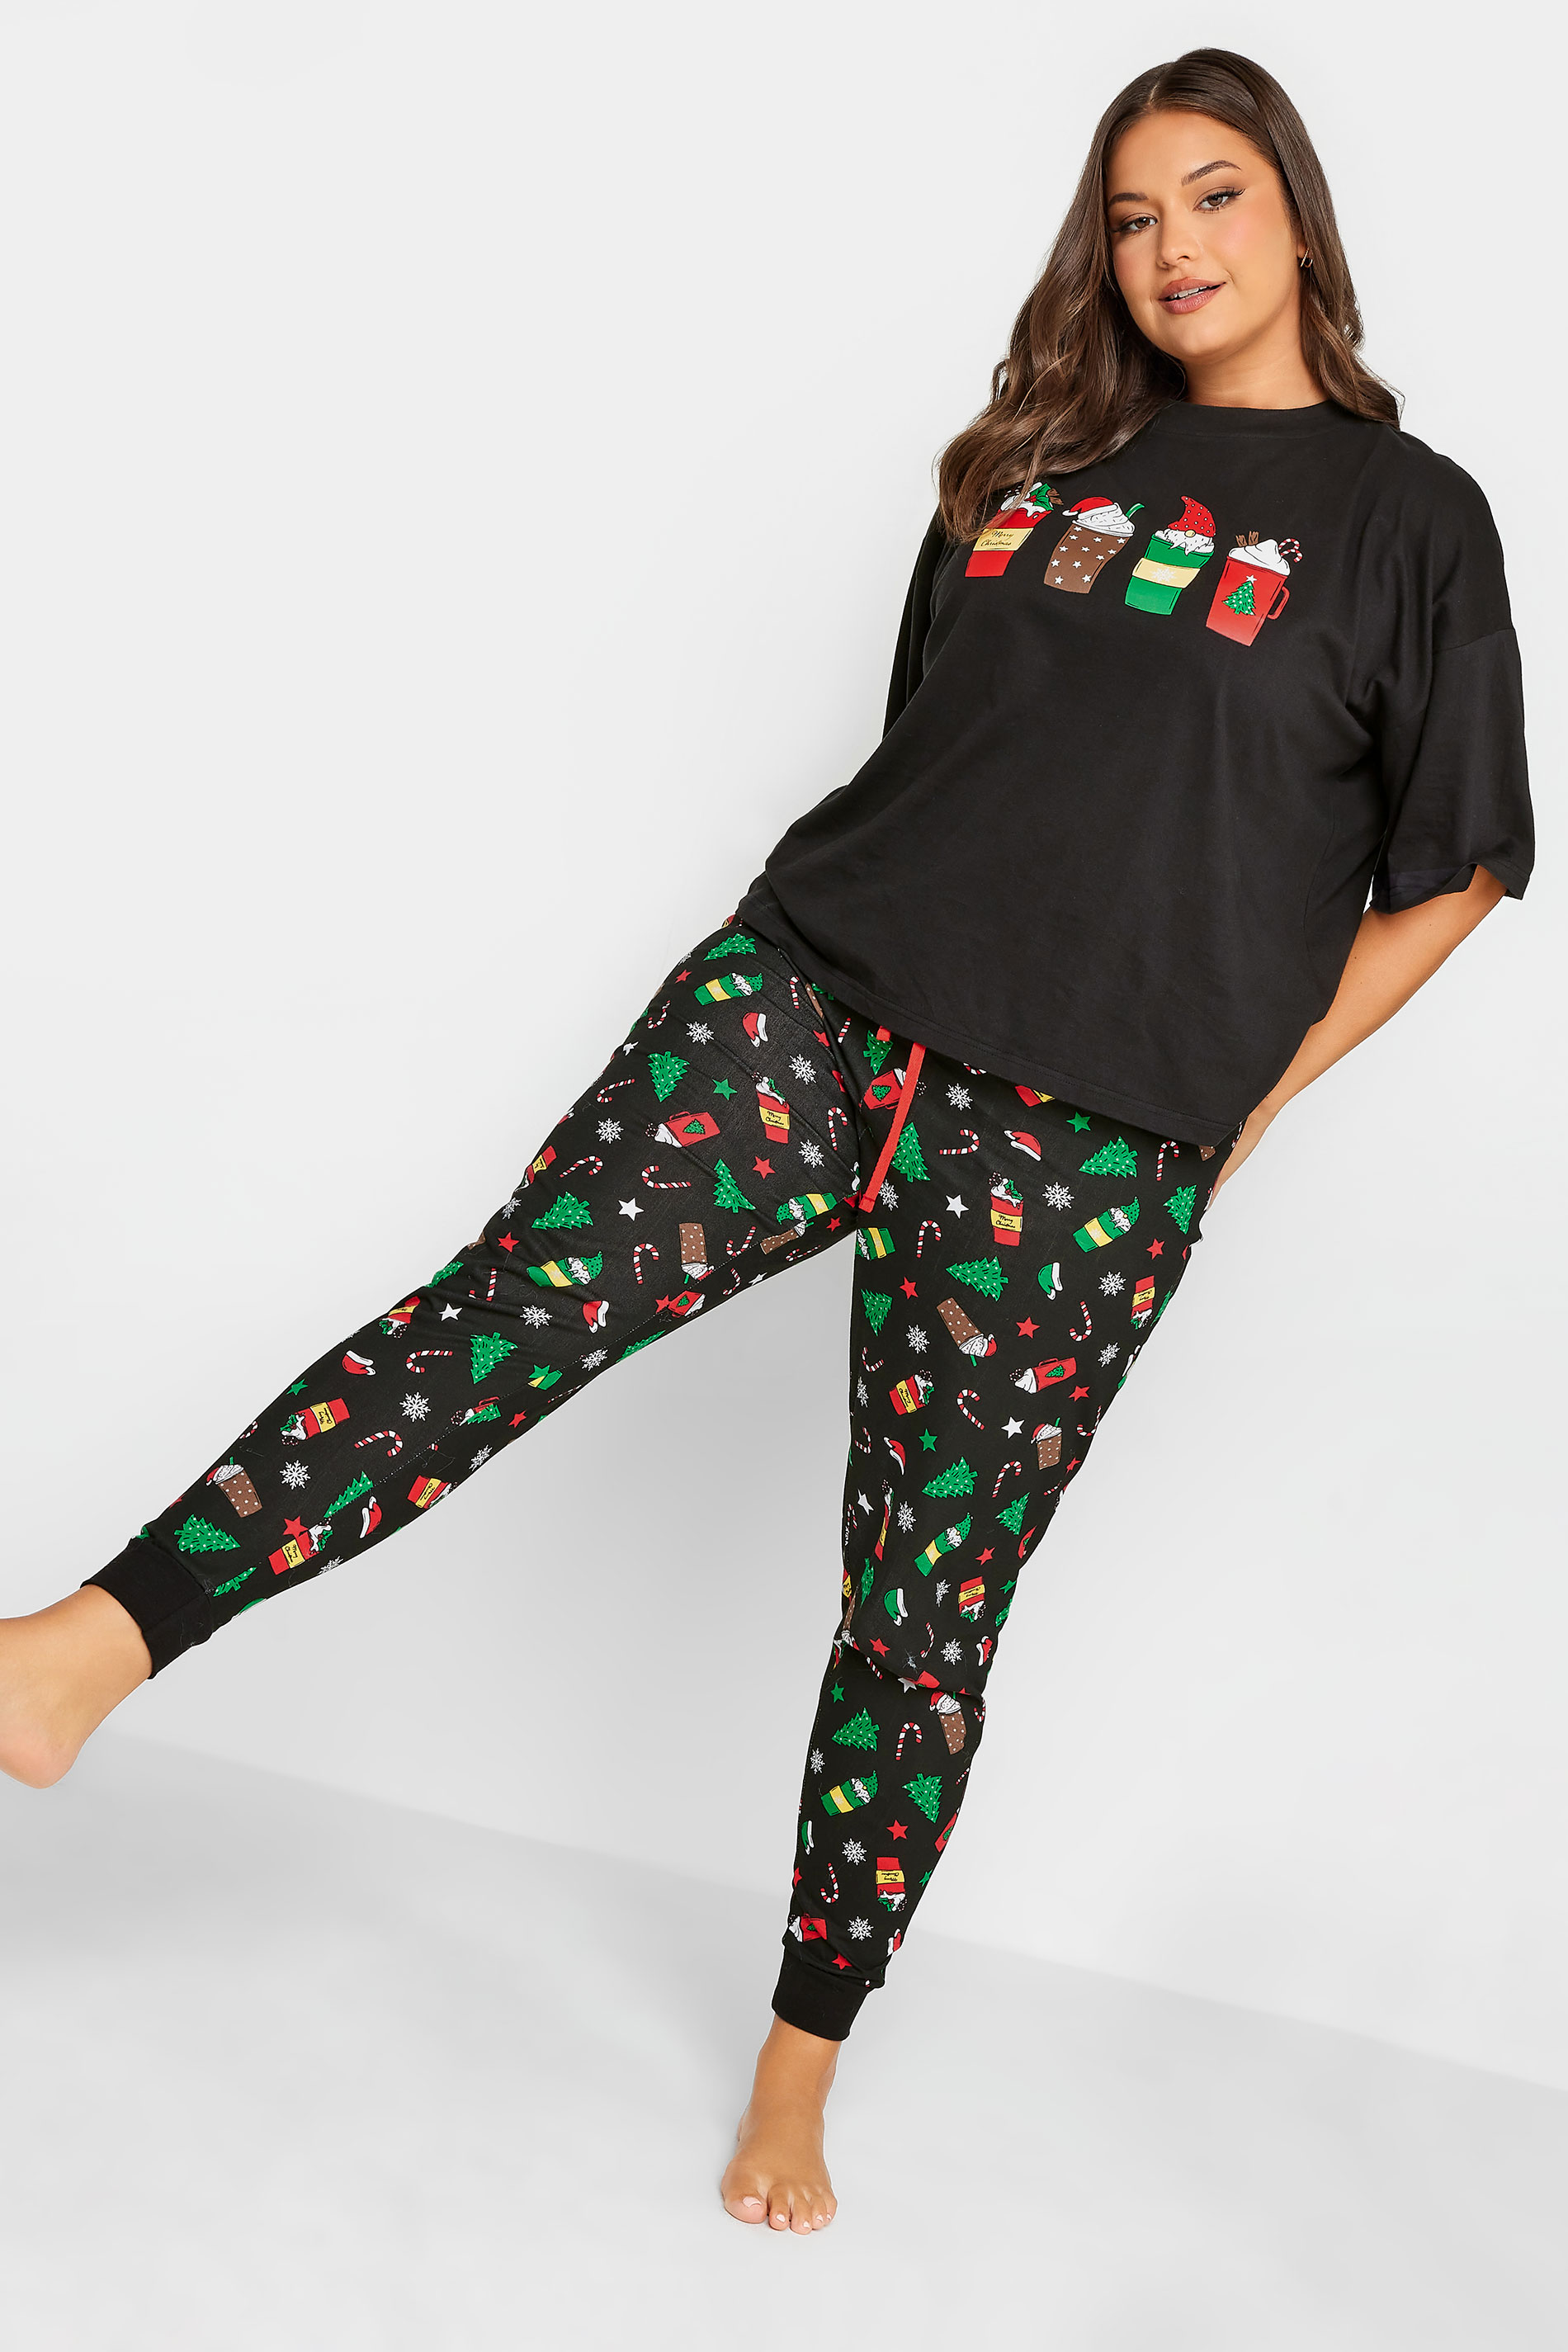 LIMITED COLLECTION Curve Plus Size Black Christmas Drink Print Pyjama Top | Yours Clothing  2